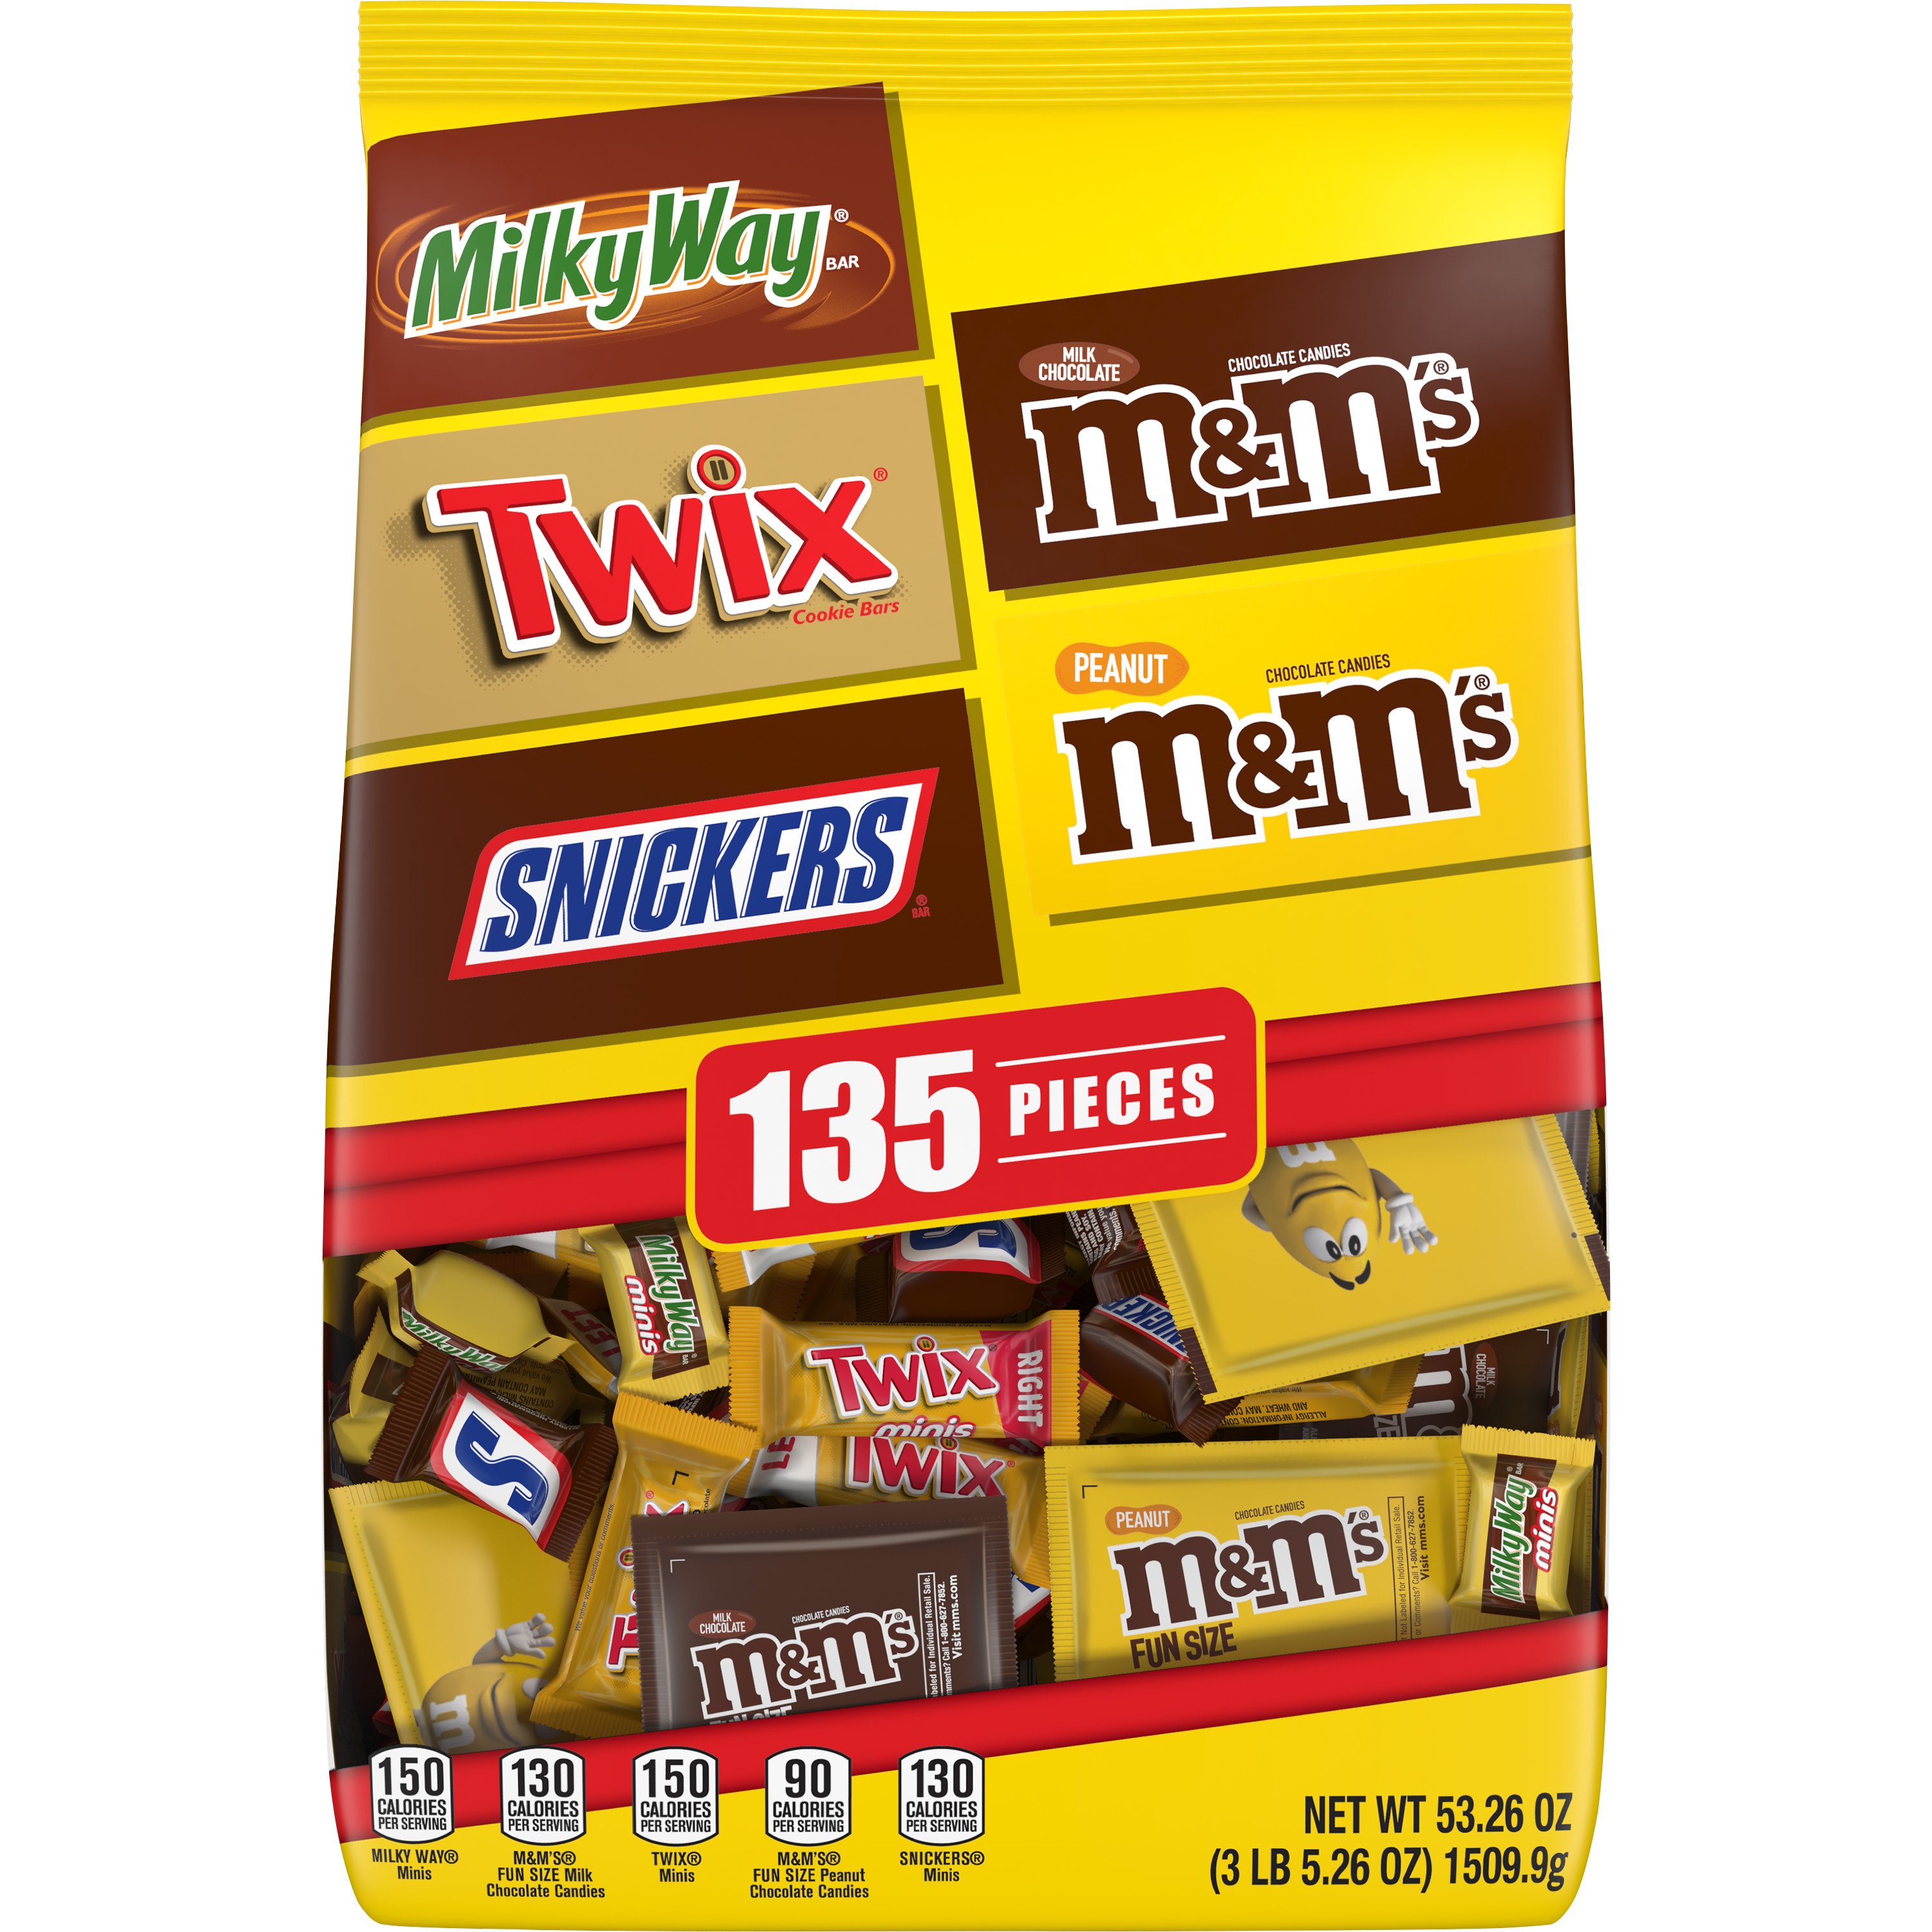 M&M's Fun Size Variety Mix Chocolate Candies - Shop Candy at H-E-B